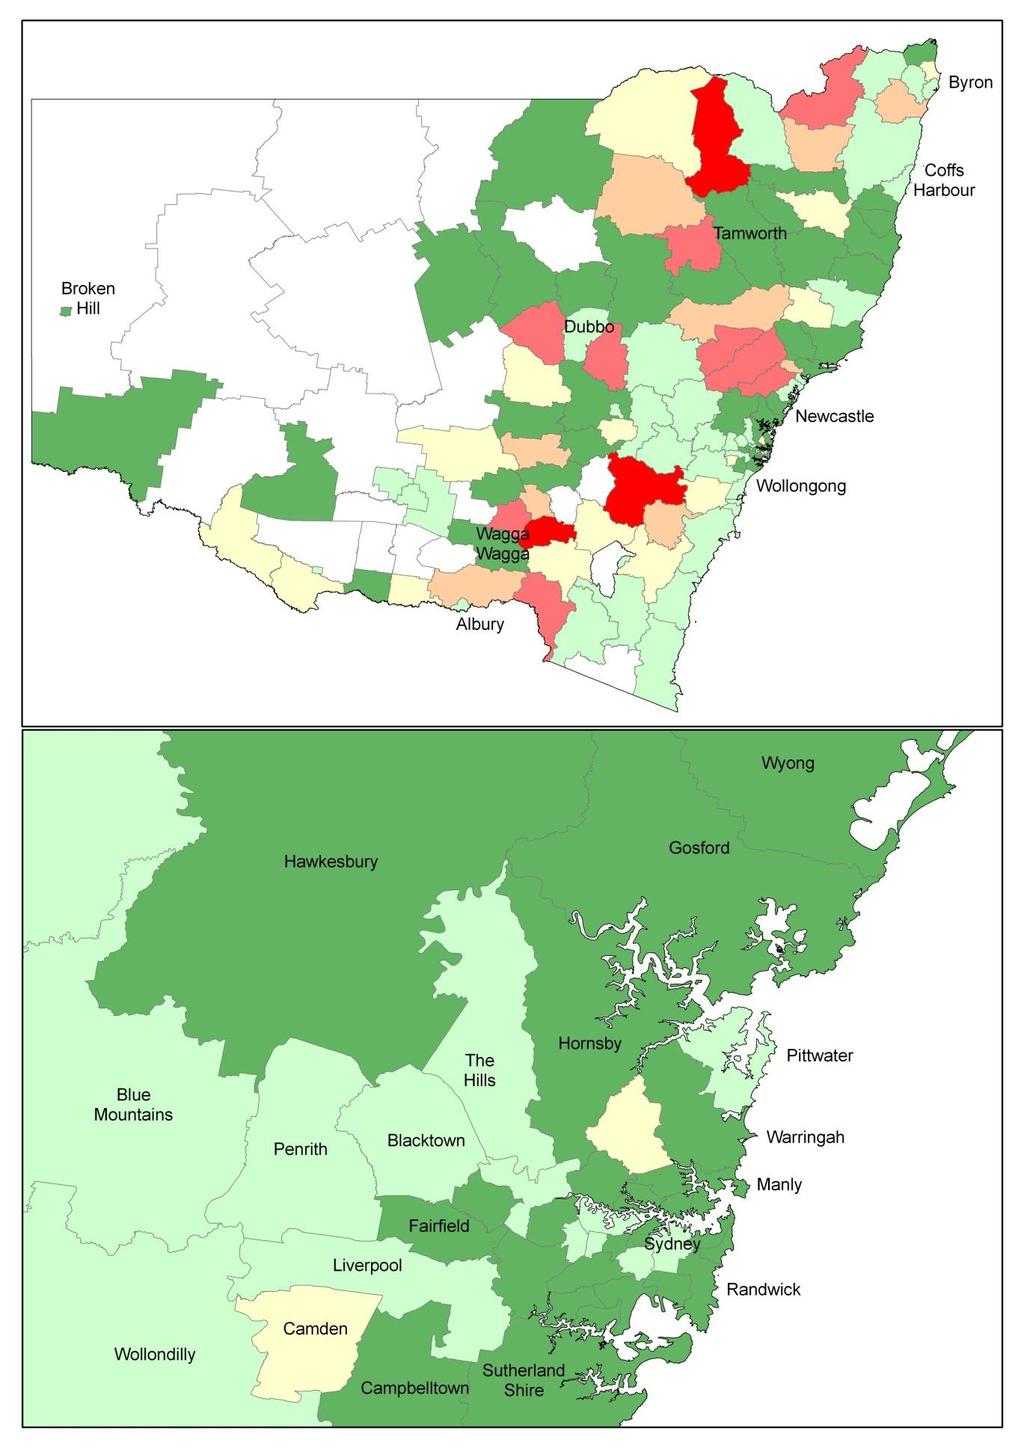 Maps 13 and 14: Percentage of residential & mixed use schemes registered* in the last 3 years for NSW and Sydney by LGA, January